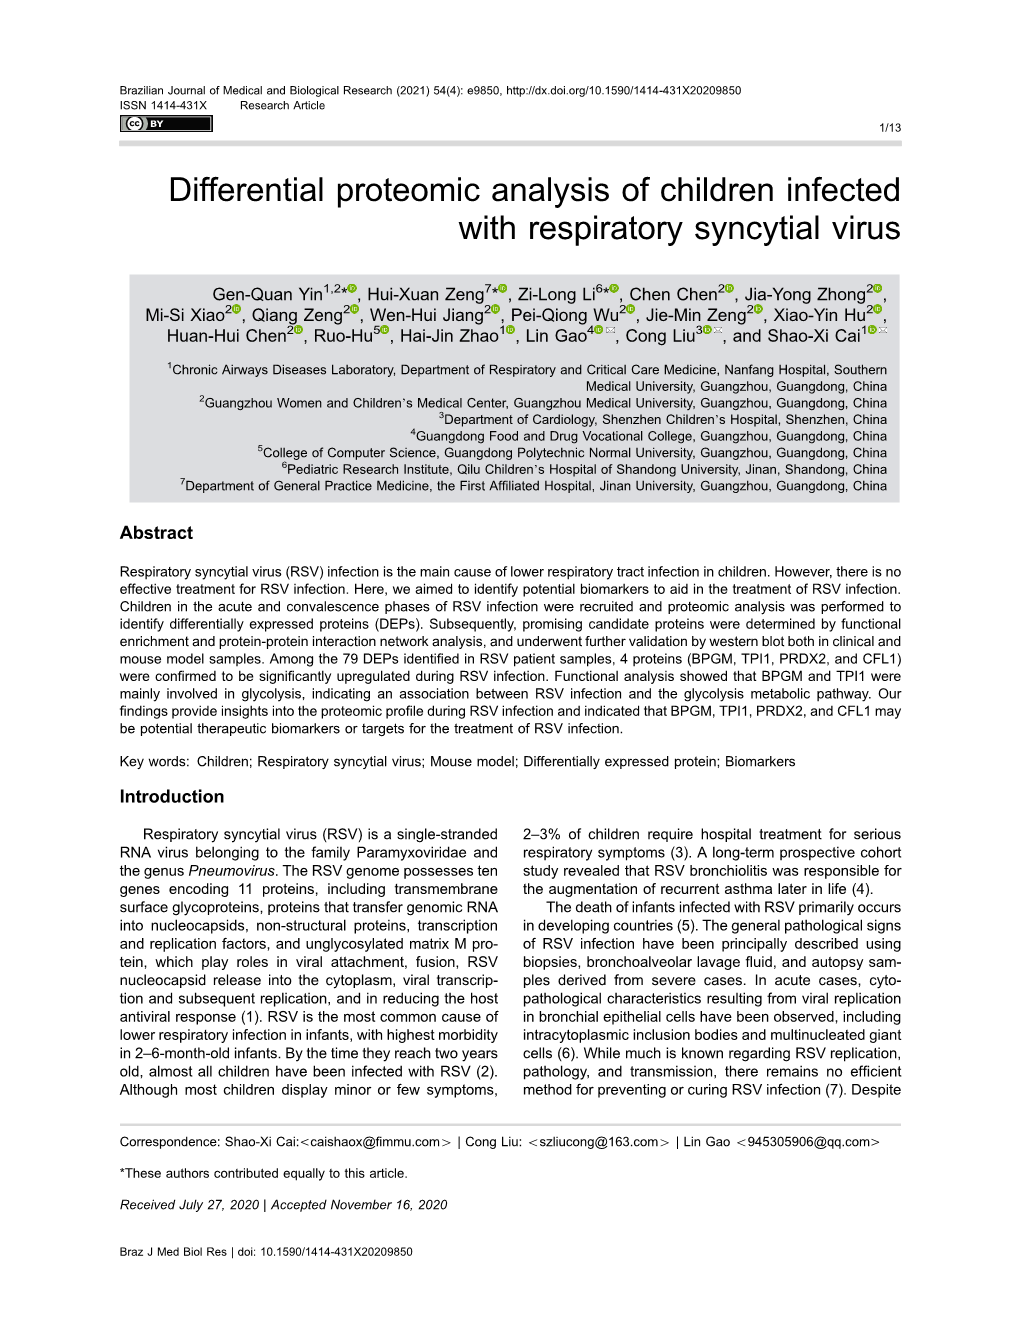 Differential Proteomic Analysis of Children Infected with Respiratory Syncytial Virus